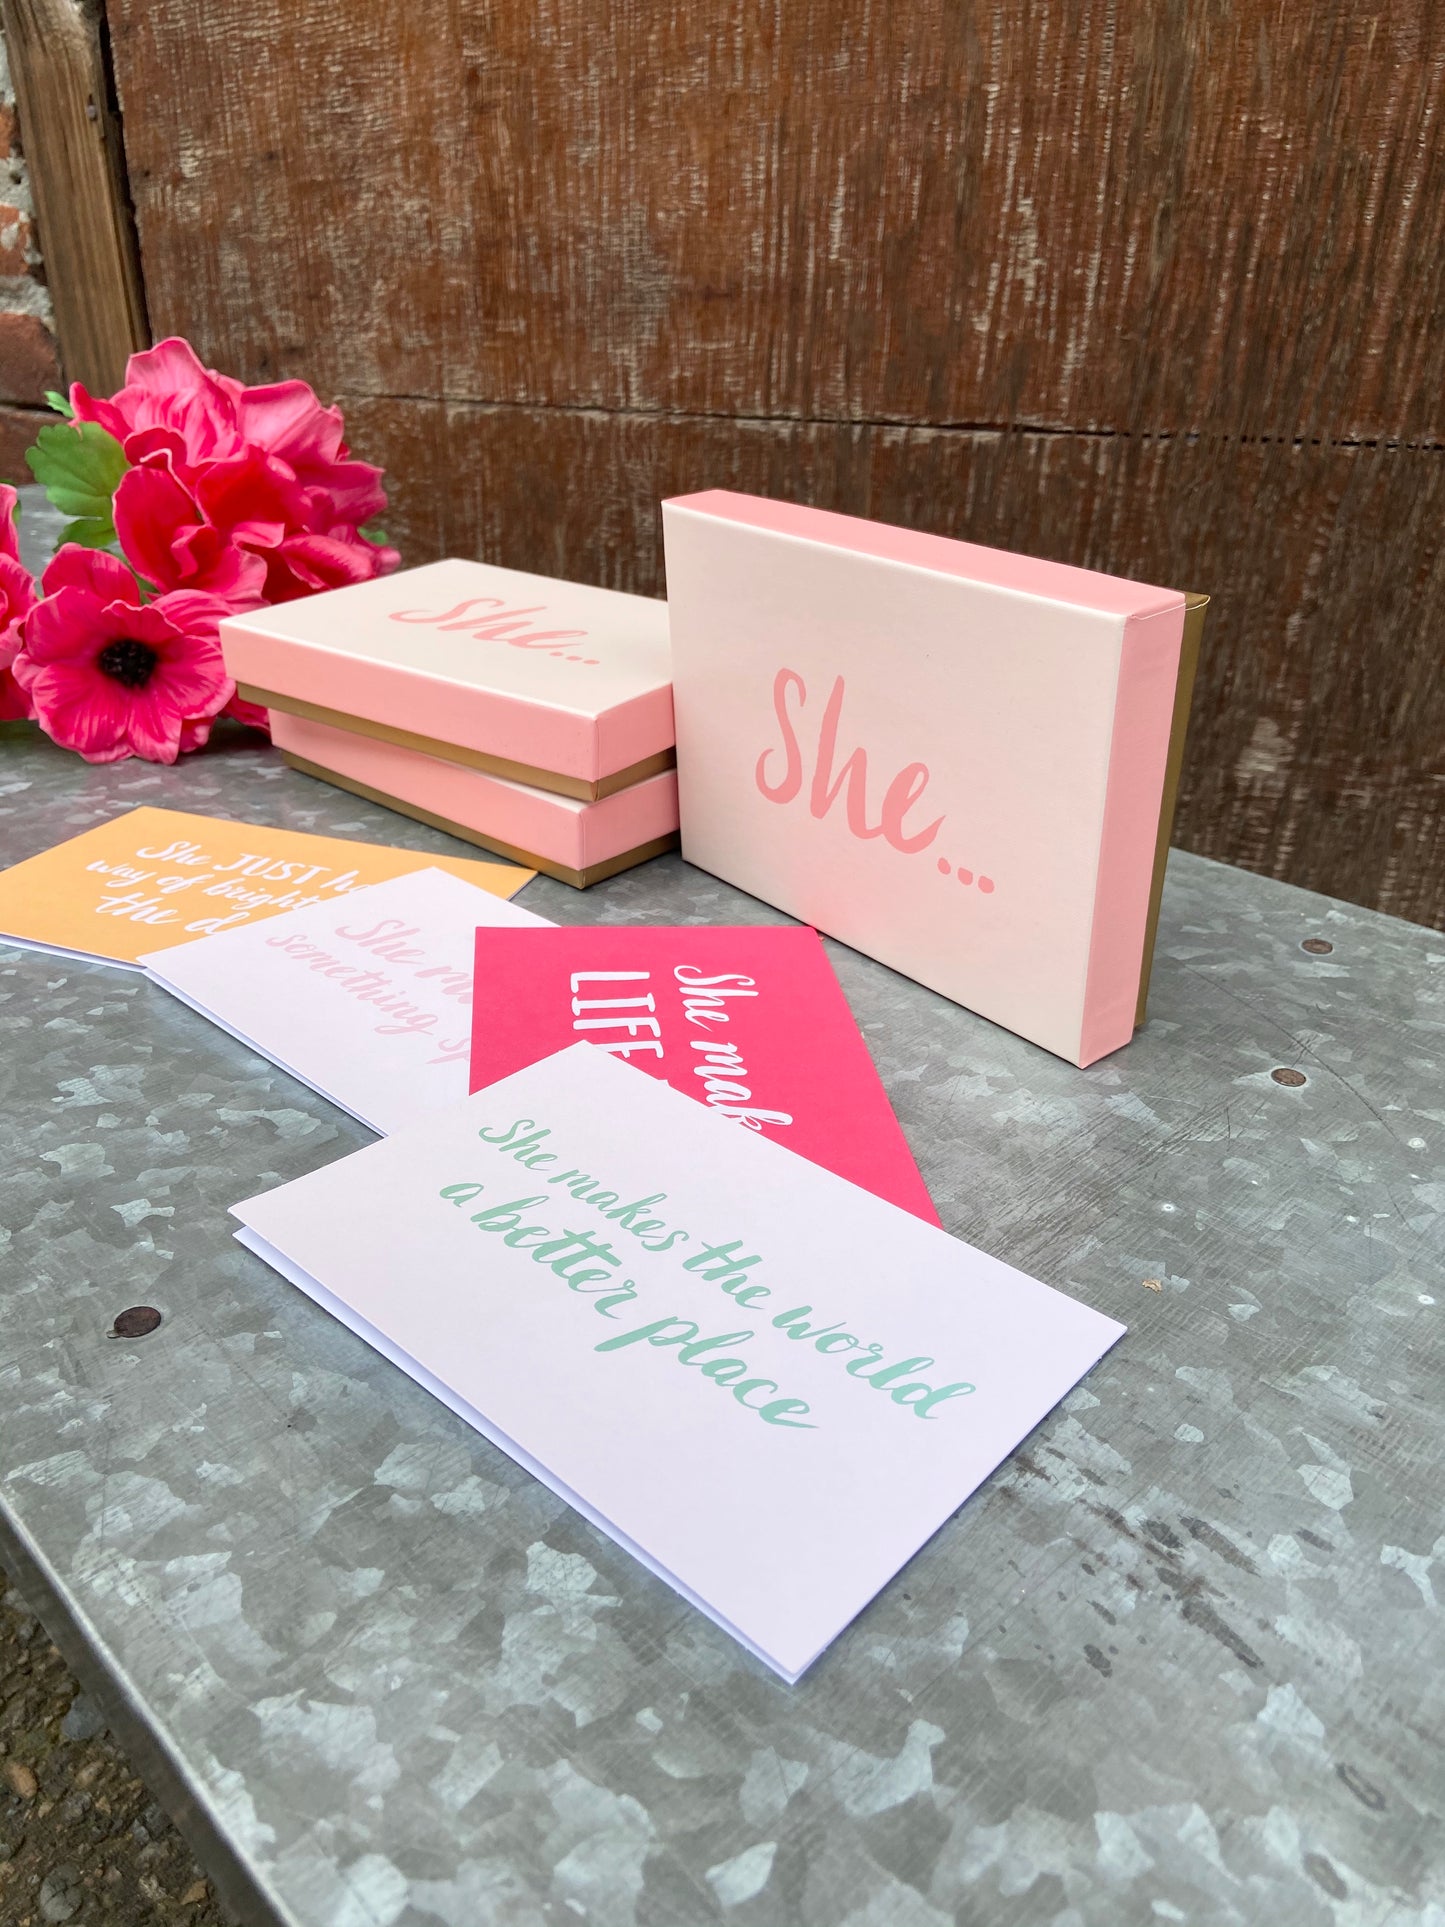 Here are 8 beautiful note cards (2 each of 4 designs) to give to the amazing women that you know. These cards are just the thing for birthdays, thank you notes, or just to let someone know you care. The envelopes are printed with polka dots in metallic gold ink, and the sentiments include:   She just has a way of brightening the day  She makes the world a better place  She makes life fun  She must be something special